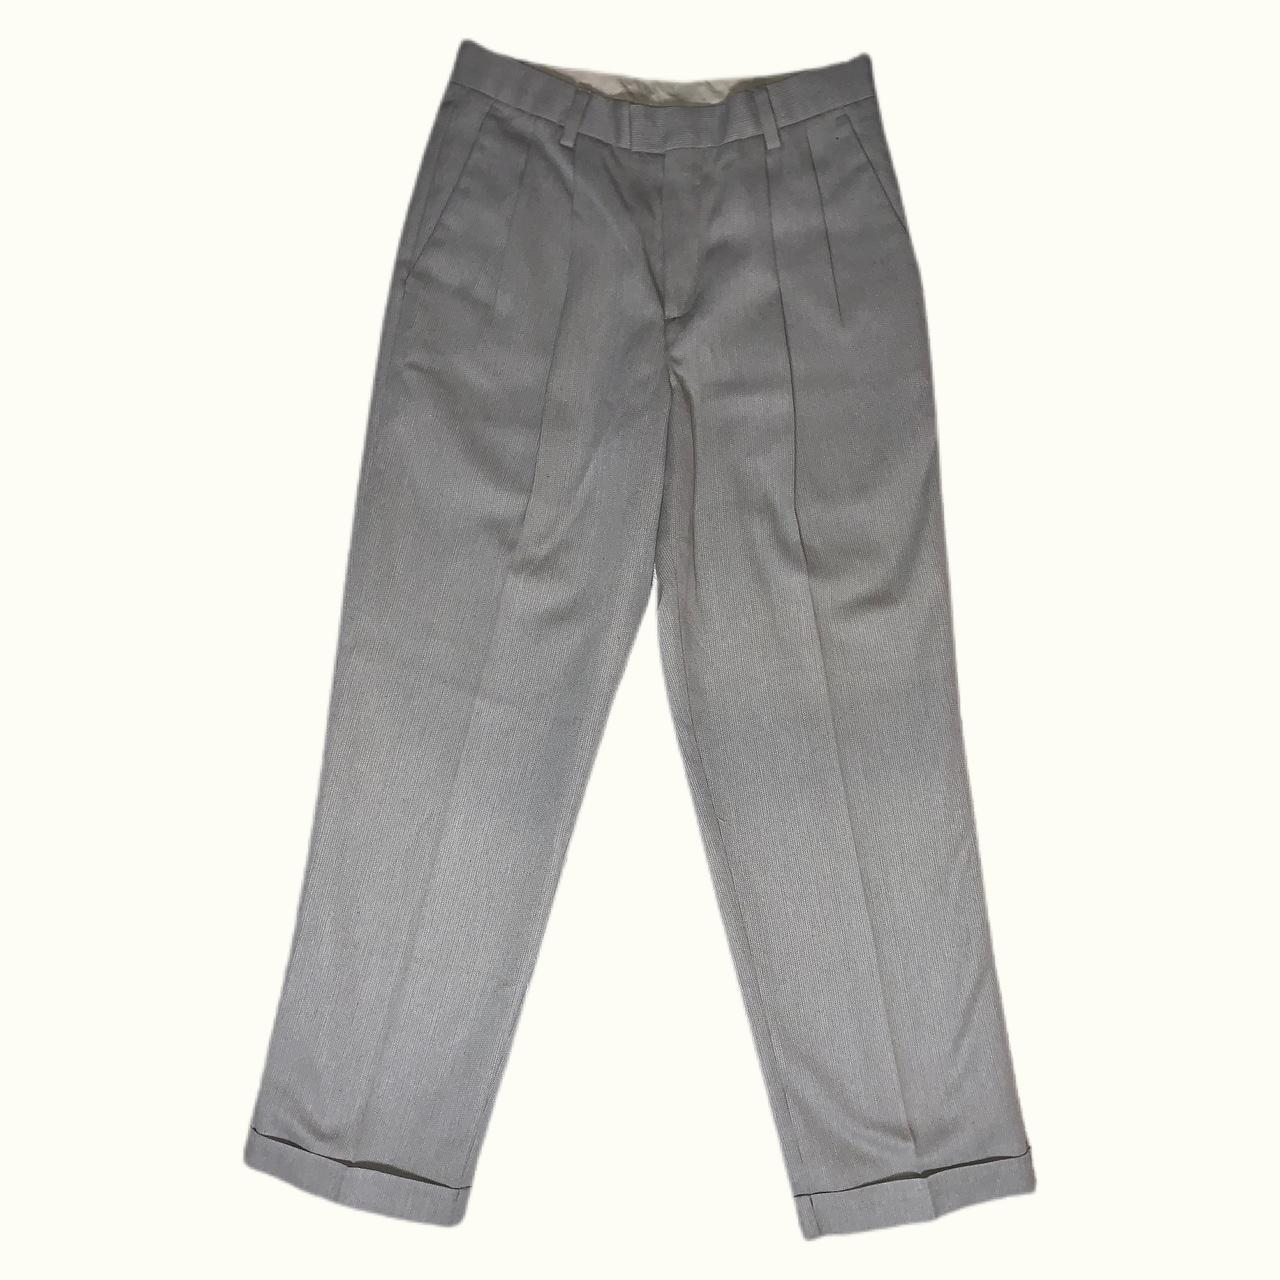 Product Image 2 - Dockers Recode pleated pants 

In